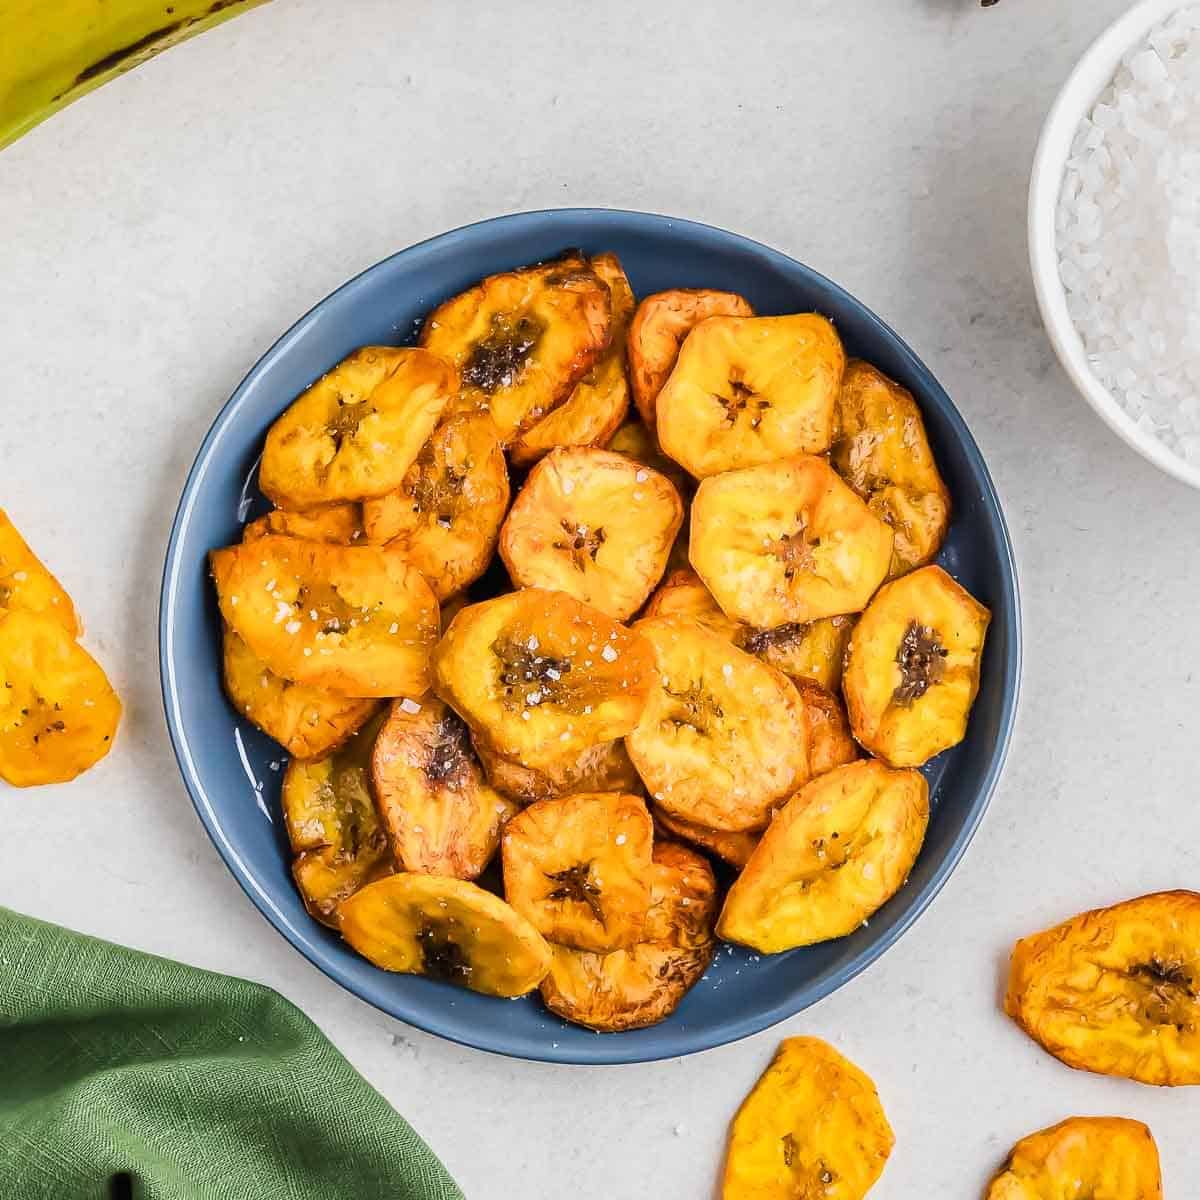 A bowl of fried plantains.